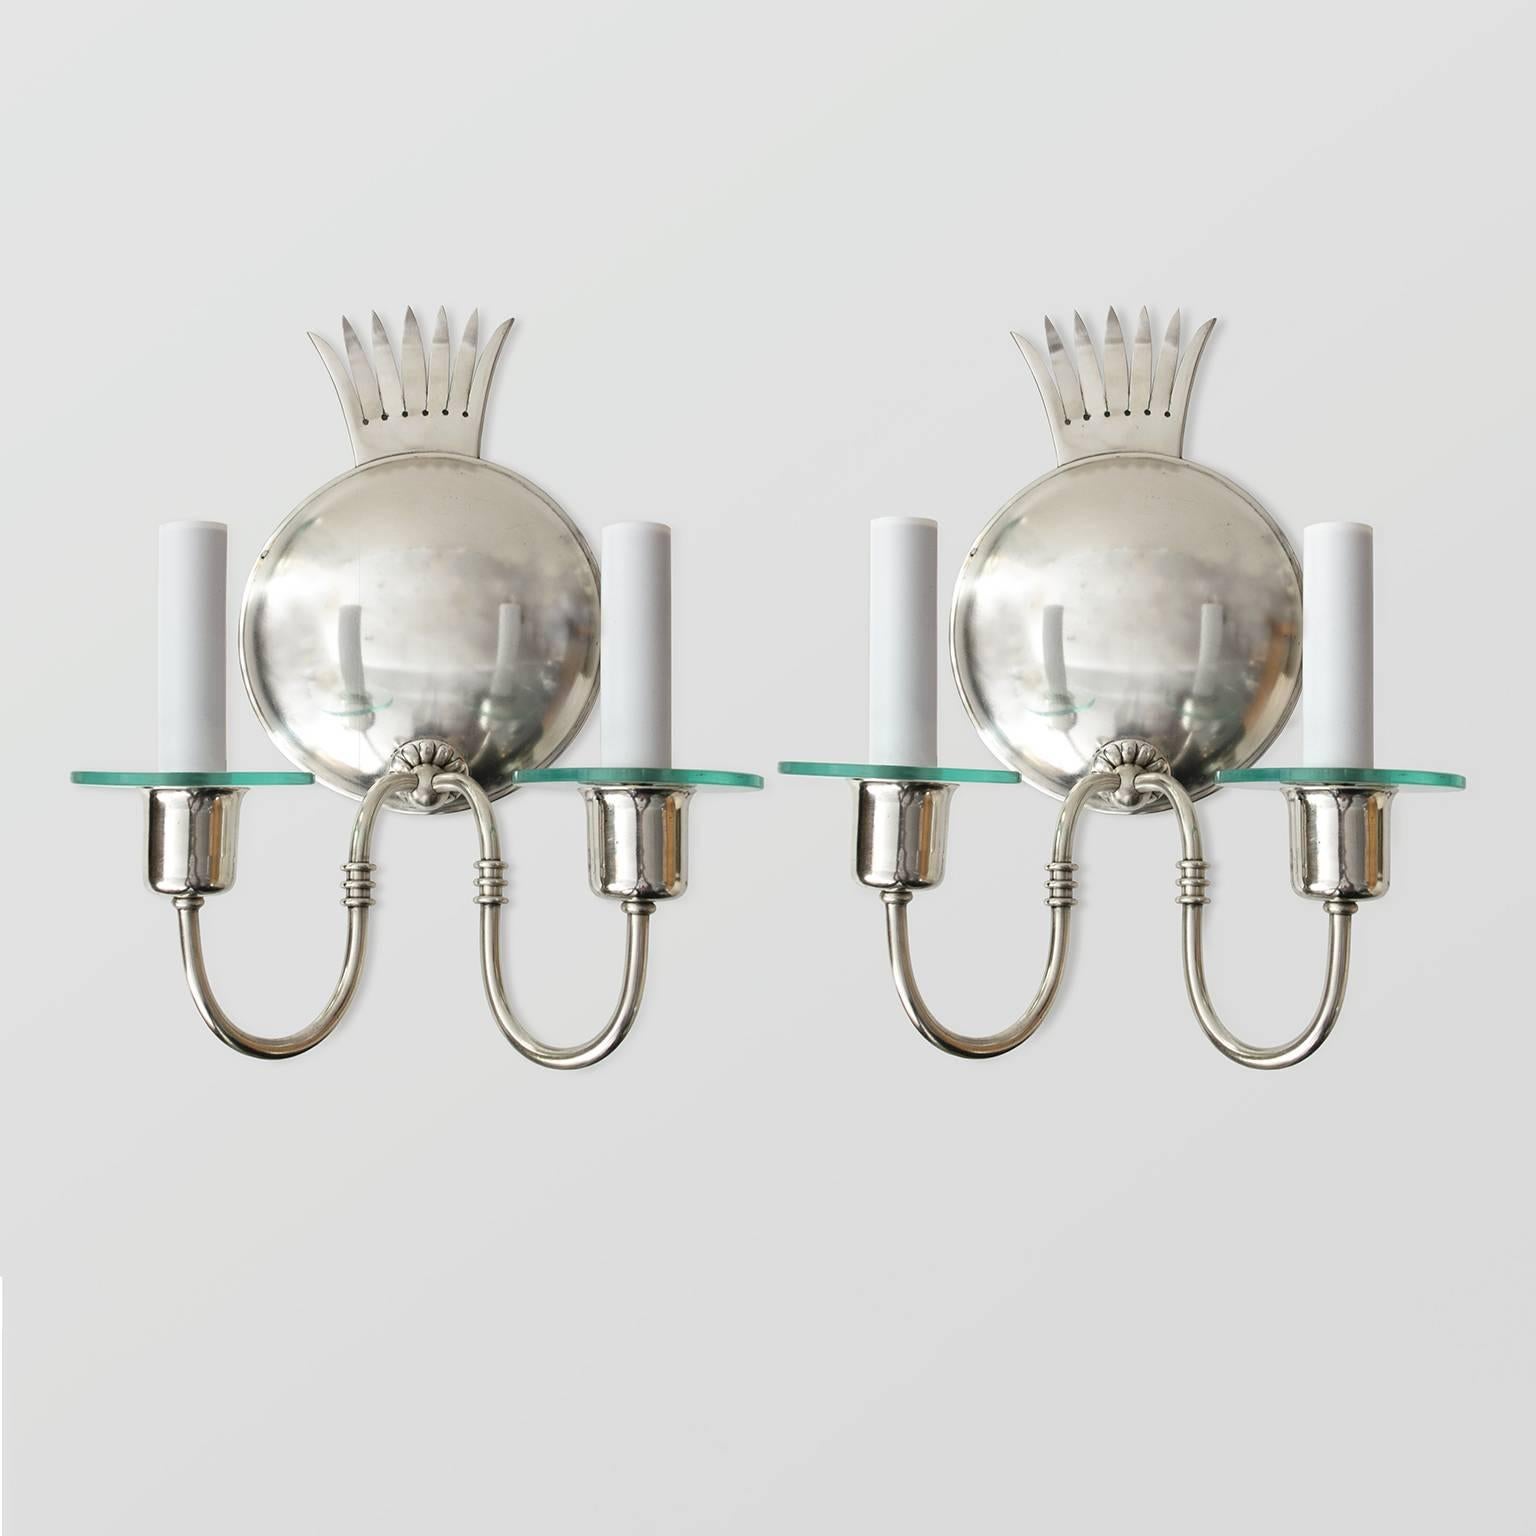 Elegant pair of Scandinavian Modern two-arm silver plated sconces by Elis Bergh for C.G. Hallberg. Each sconces has a round convex backplate with a stylized crown at the top. Each arm is detailed with a custom glass bobeche. Newly polished and